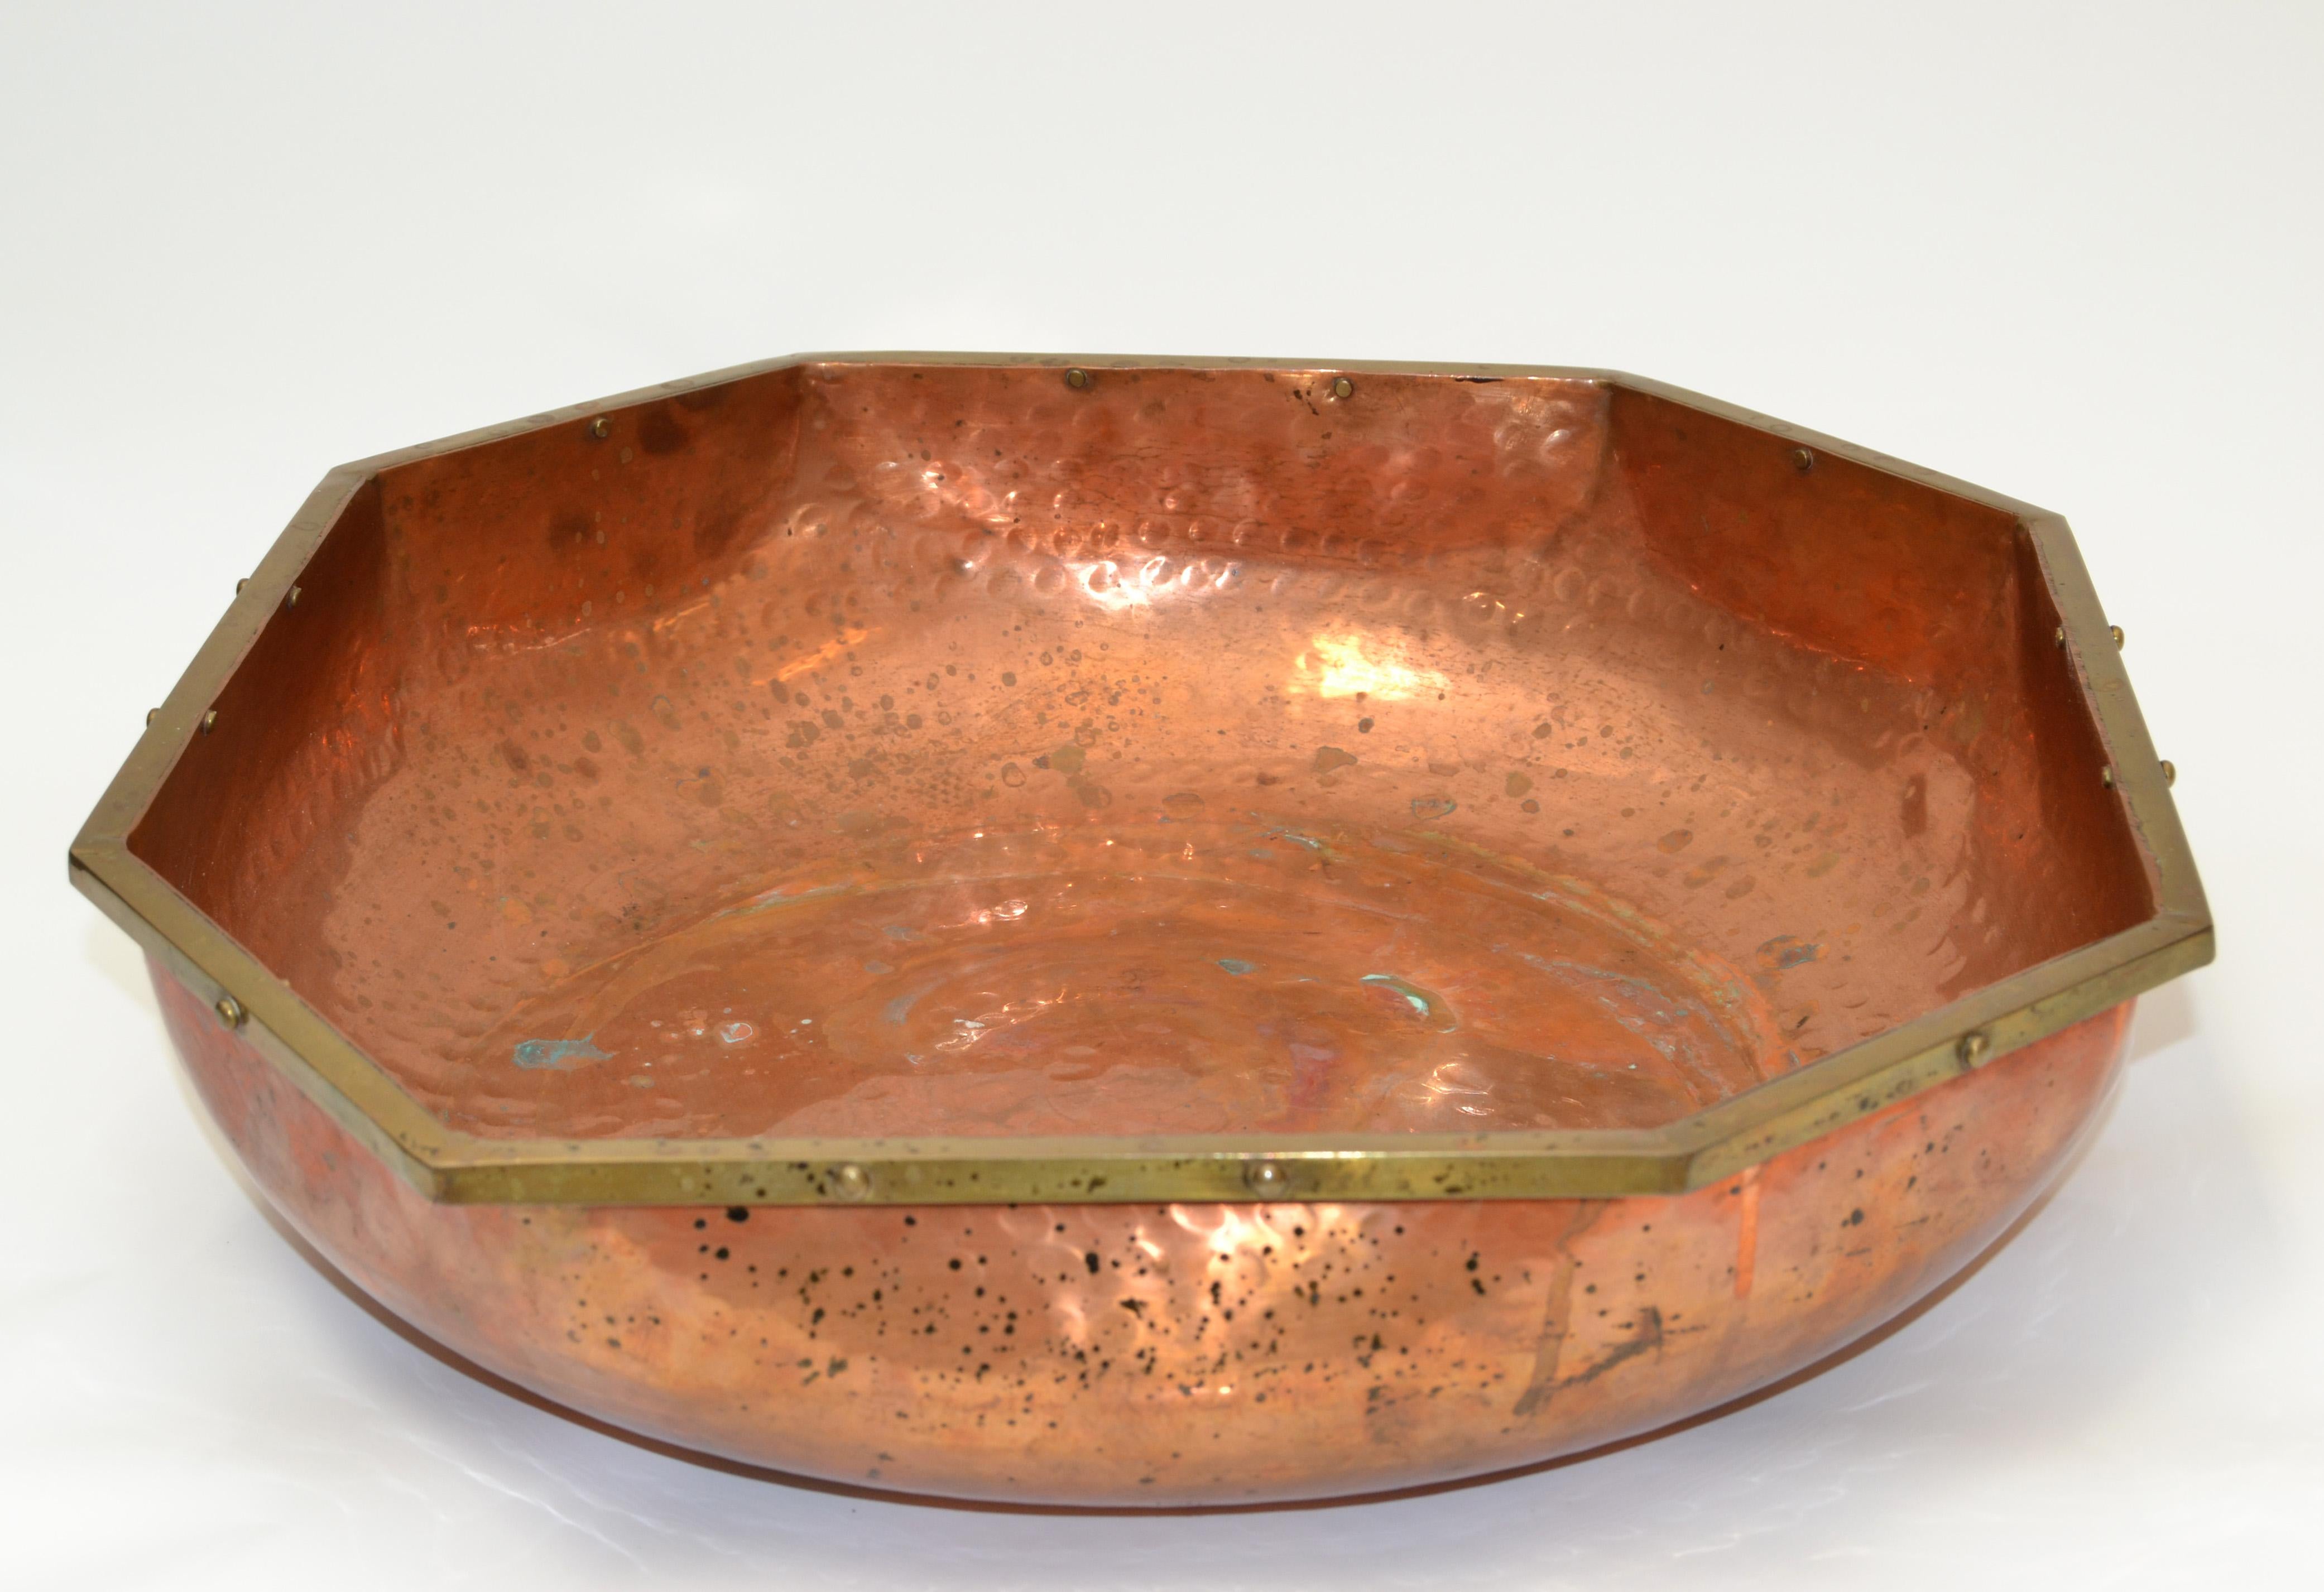 French Art Deco hand-hammered copper, brass and bronze detail octagonal large bowl, centerpiece.
Heavy and great quality craftsmanship.
Perfect also as a Centerpiece, Fruit bowl for Your Holiday Gathering.

